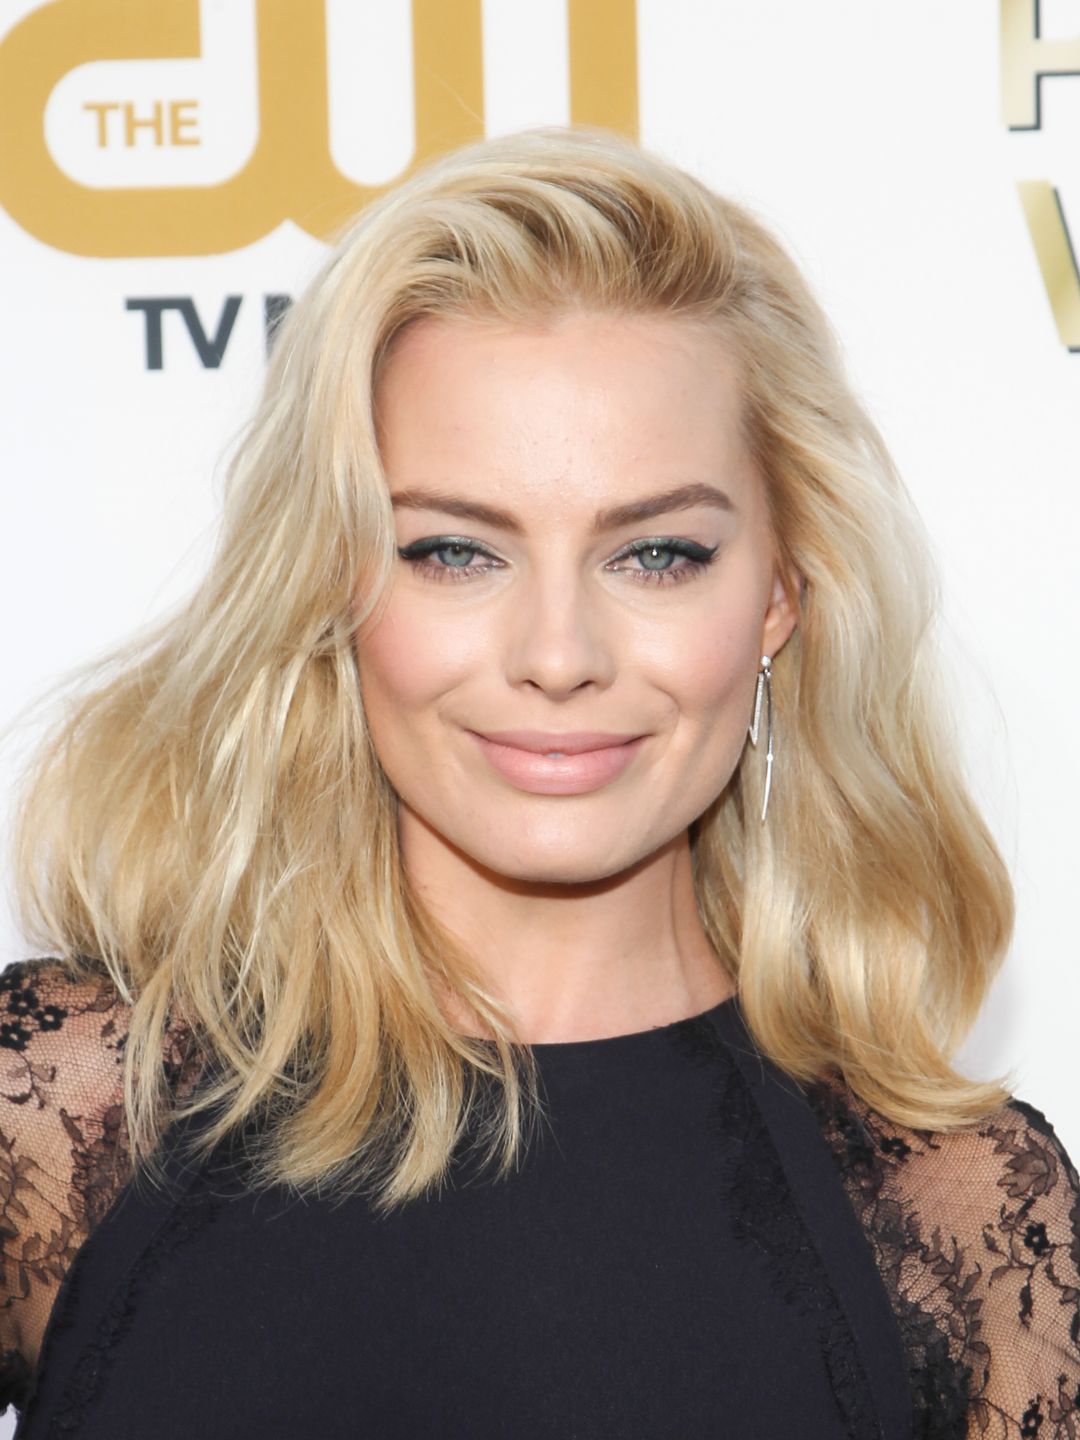 Margot Robbie who is her father